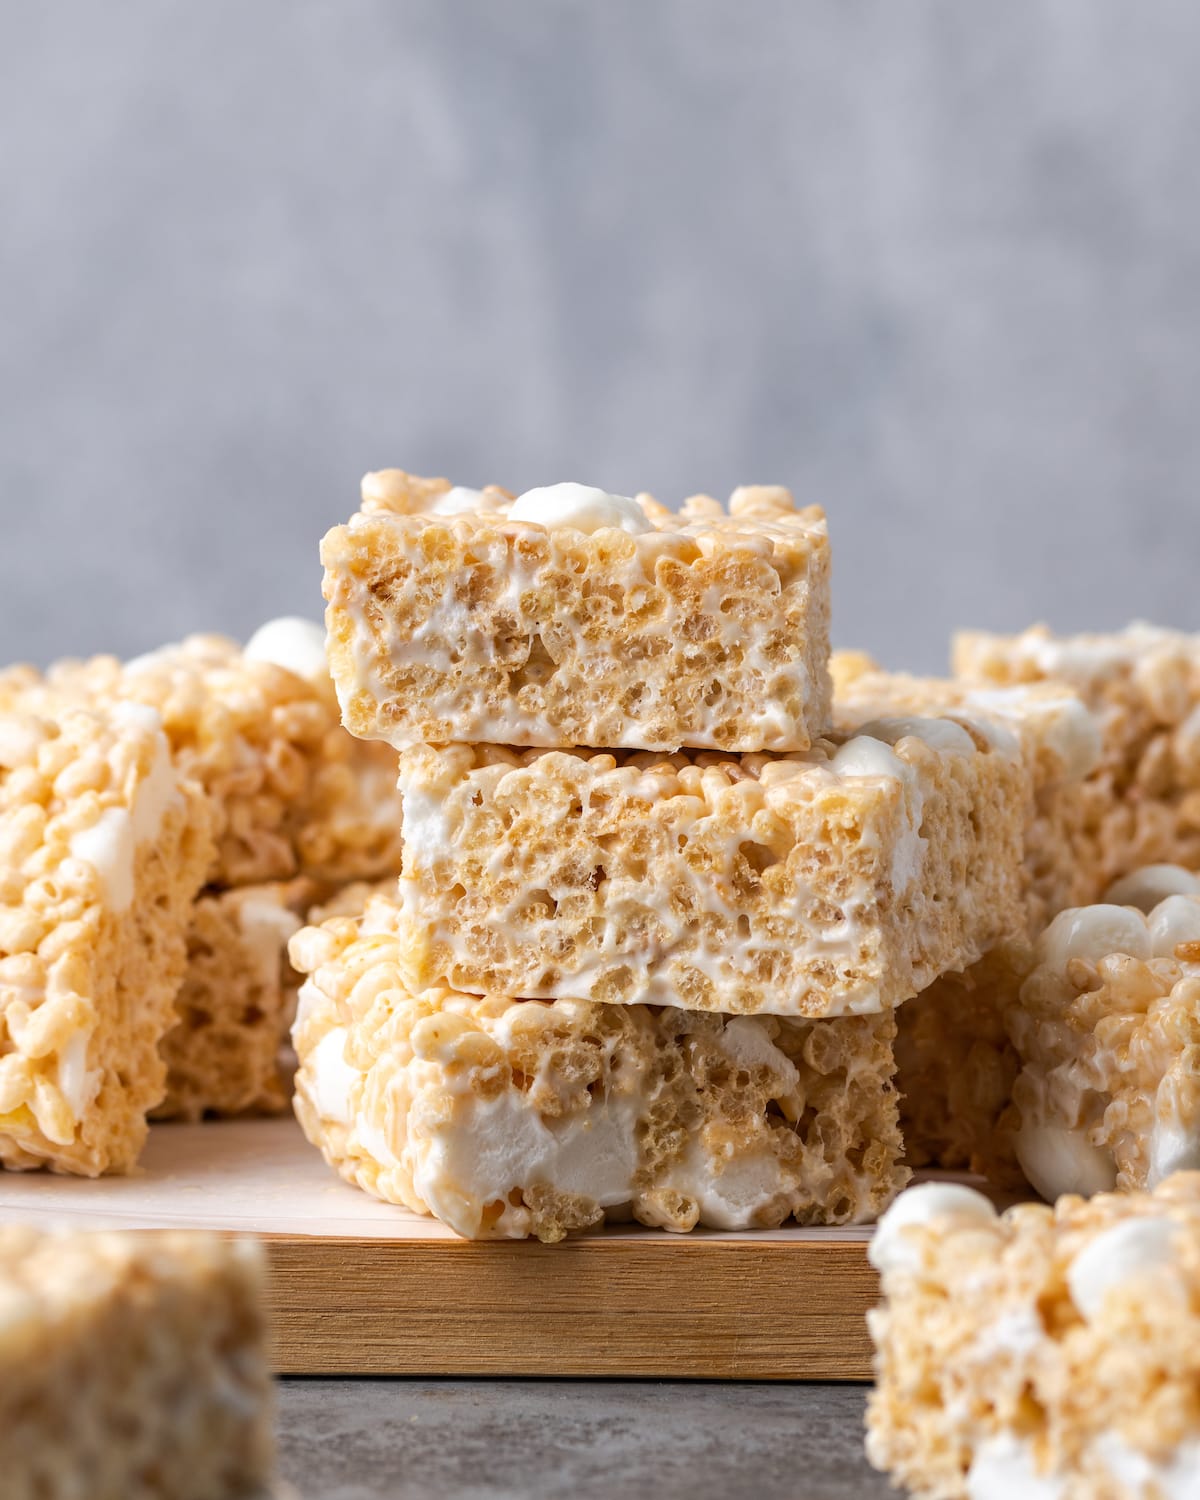 Rice Krispie Treats stacked on a wooden platter lined with parchment paper.